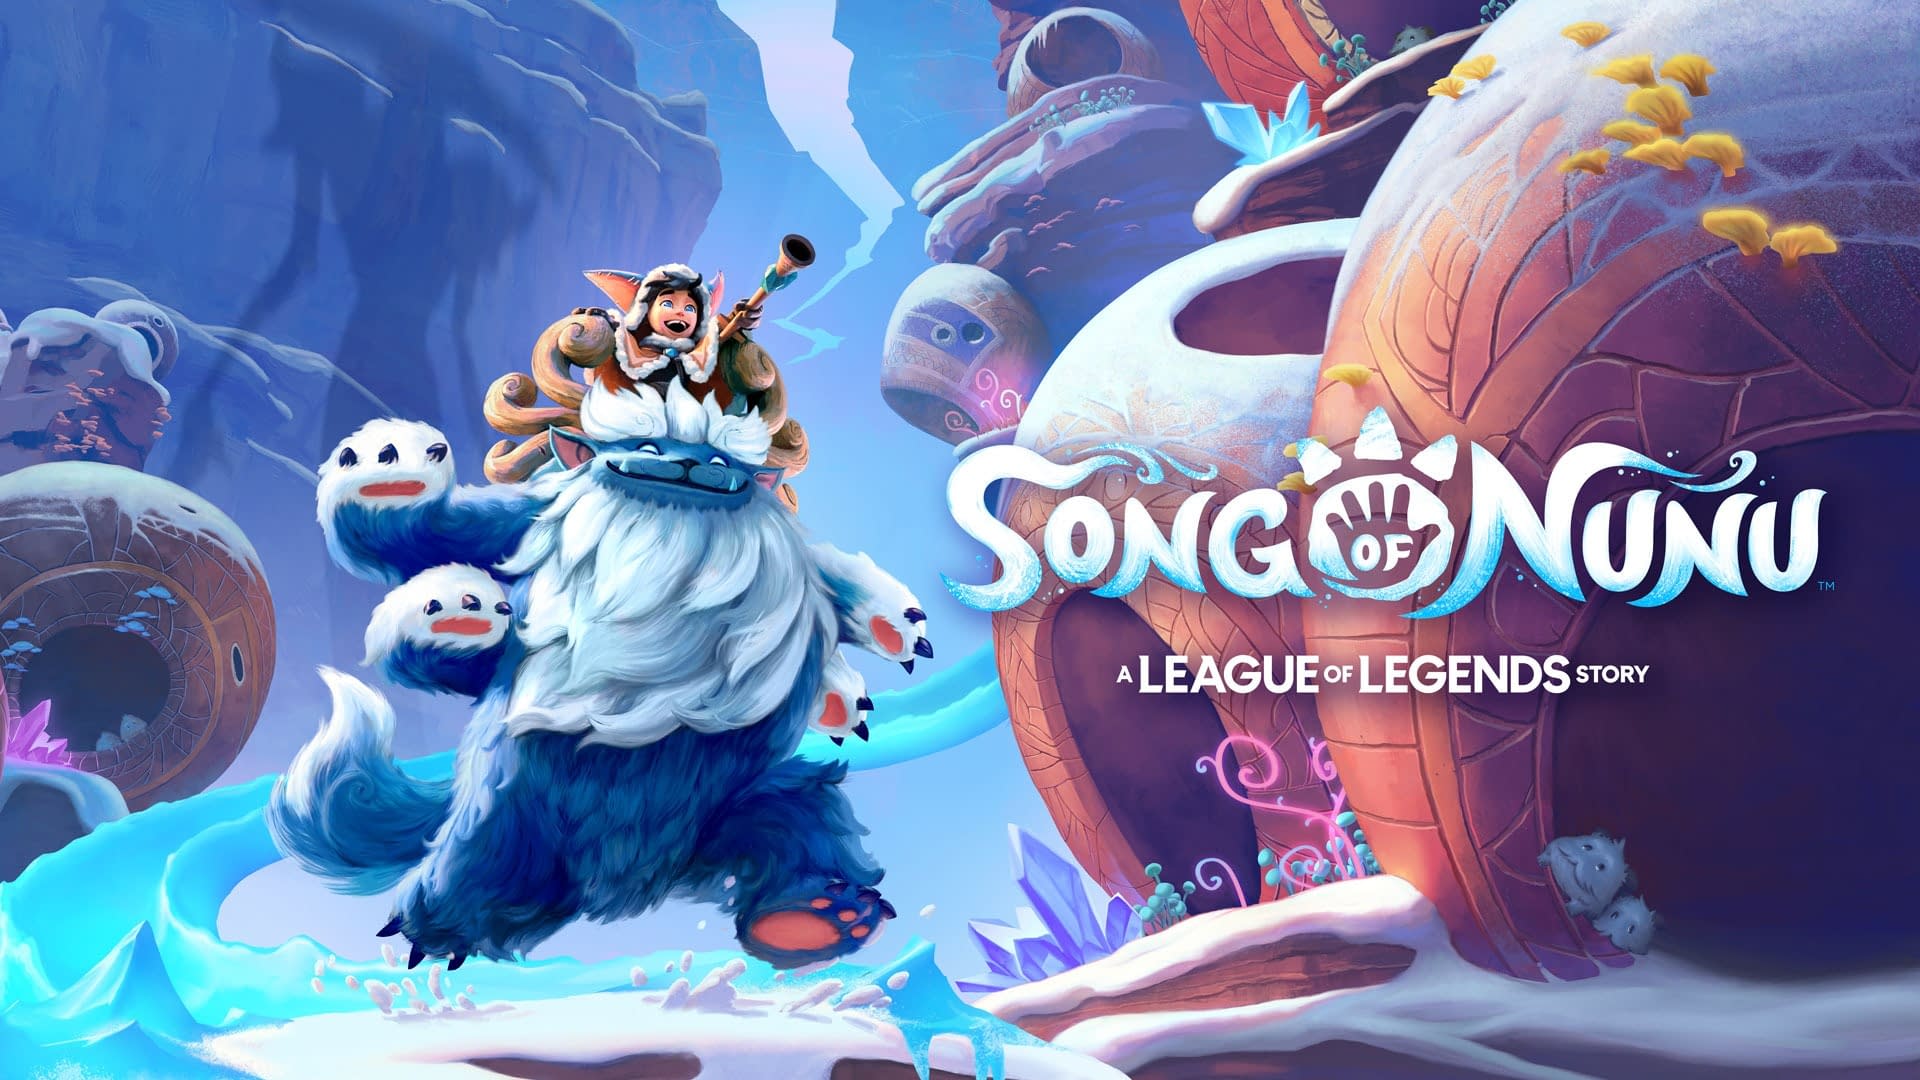 New Lol Adventure Comes Song of Nunu: Here All Details